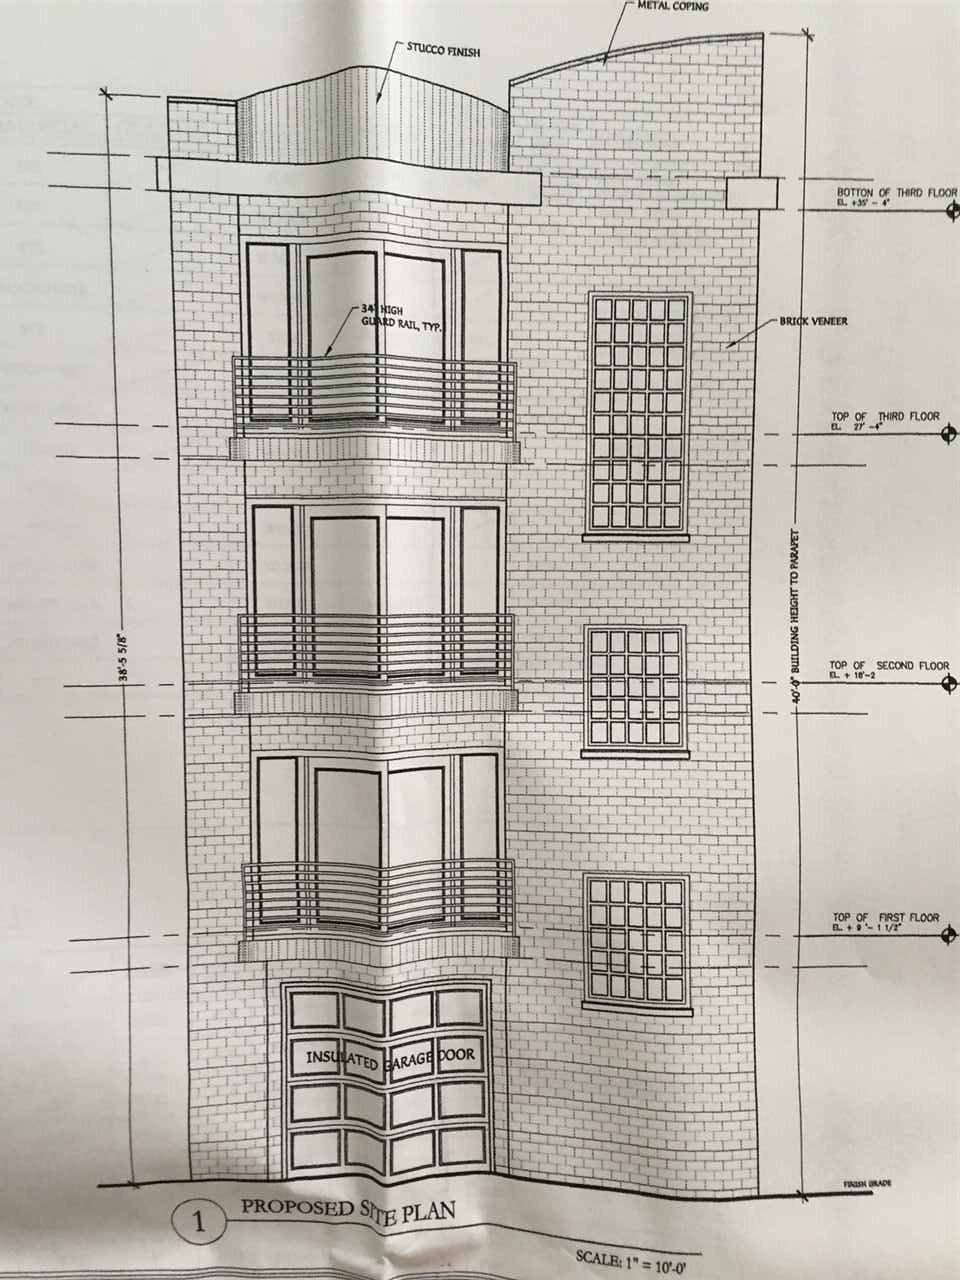 Lot with approvals for 3 stories over garage - Land New Jersey